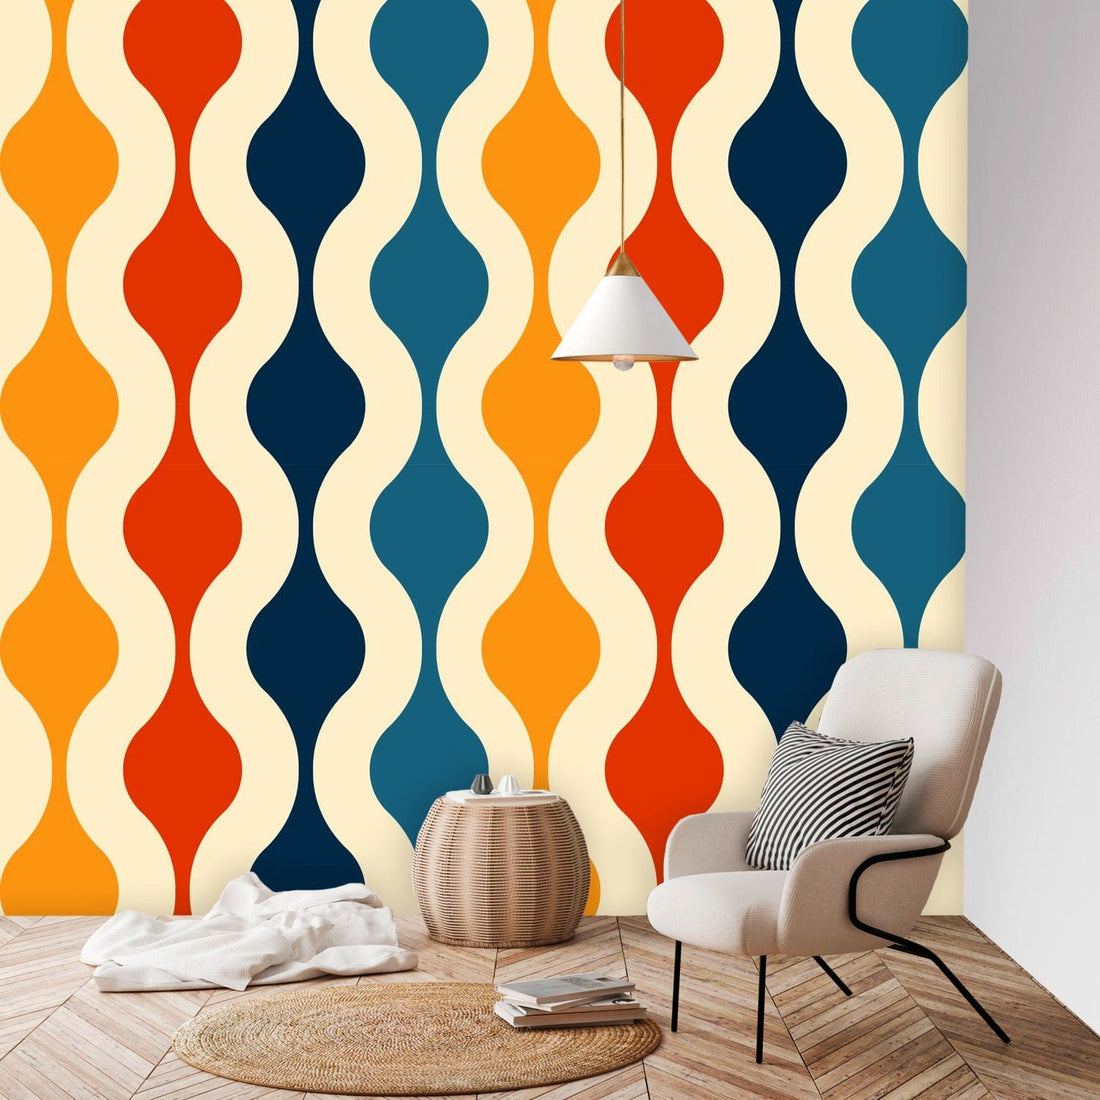 Retro Abstracts, Mid Century Modern Peel And Stick, Mustard Yellow, Red, Blue, Groovy Wall Murals Wallpaper H96 x W100